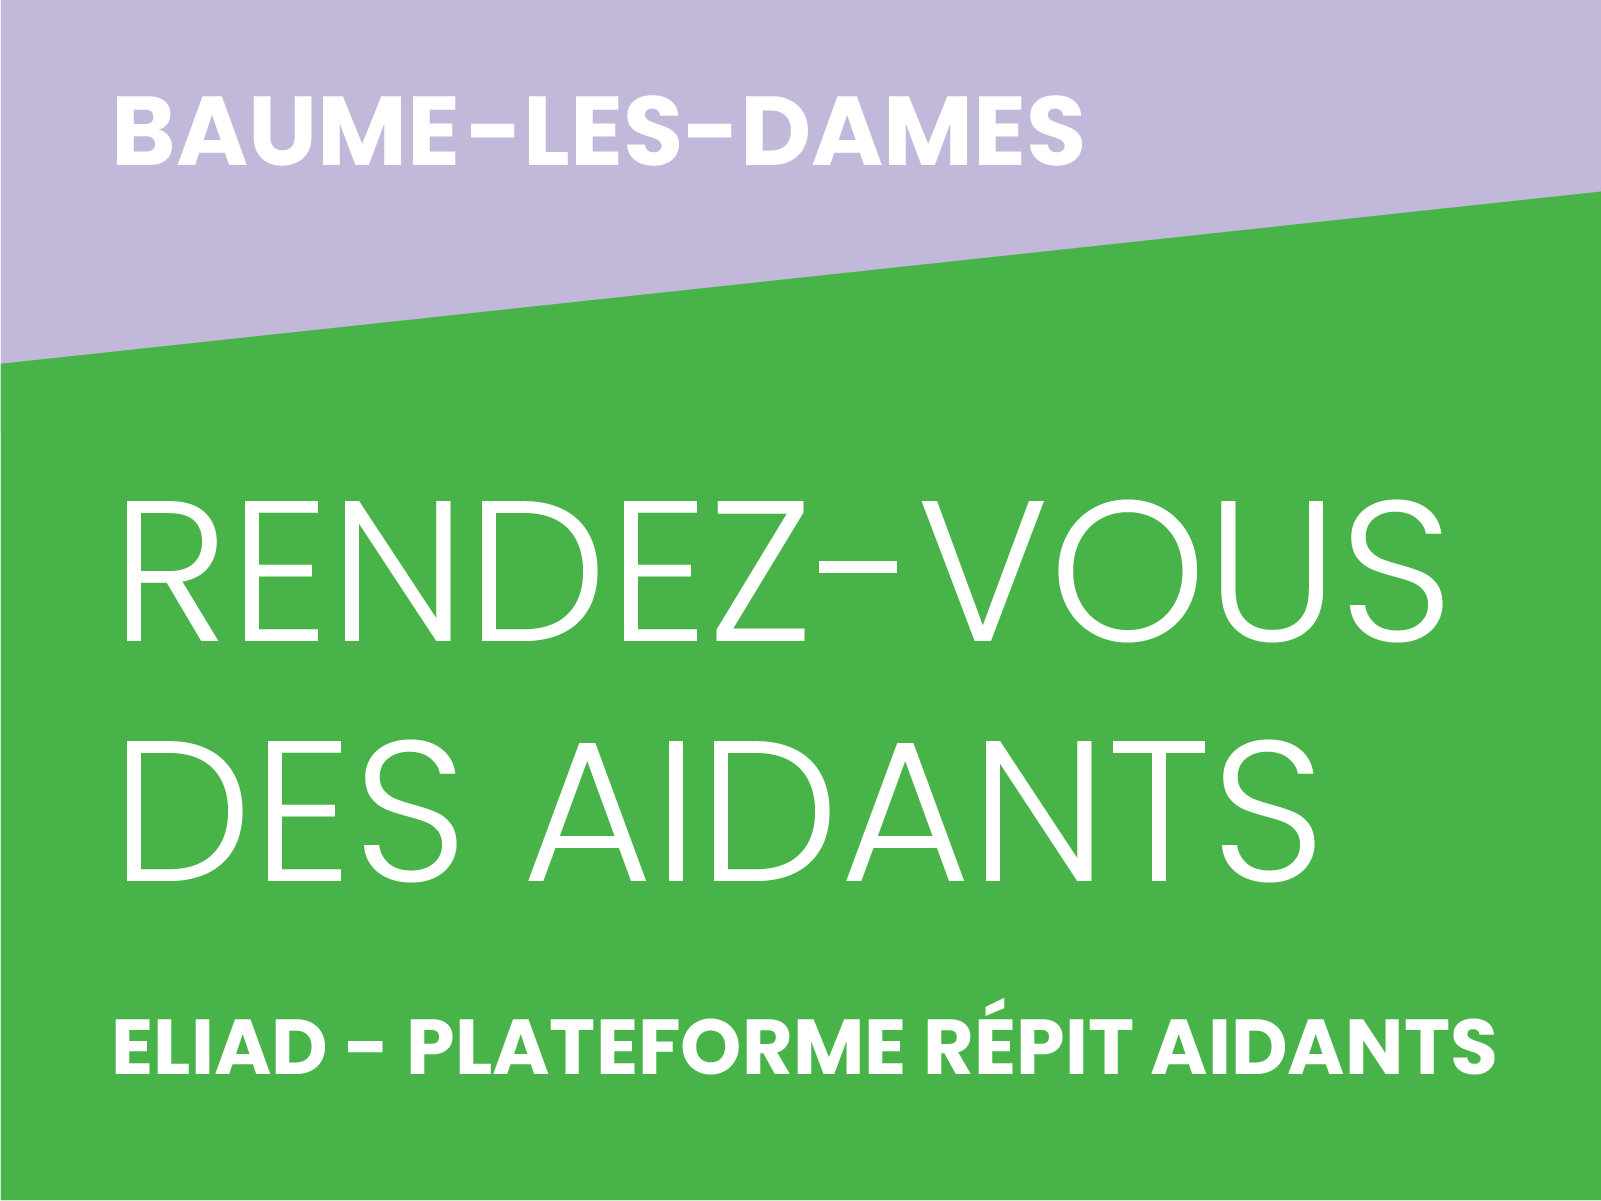 You are currently viewing Rendez-vous des aidants